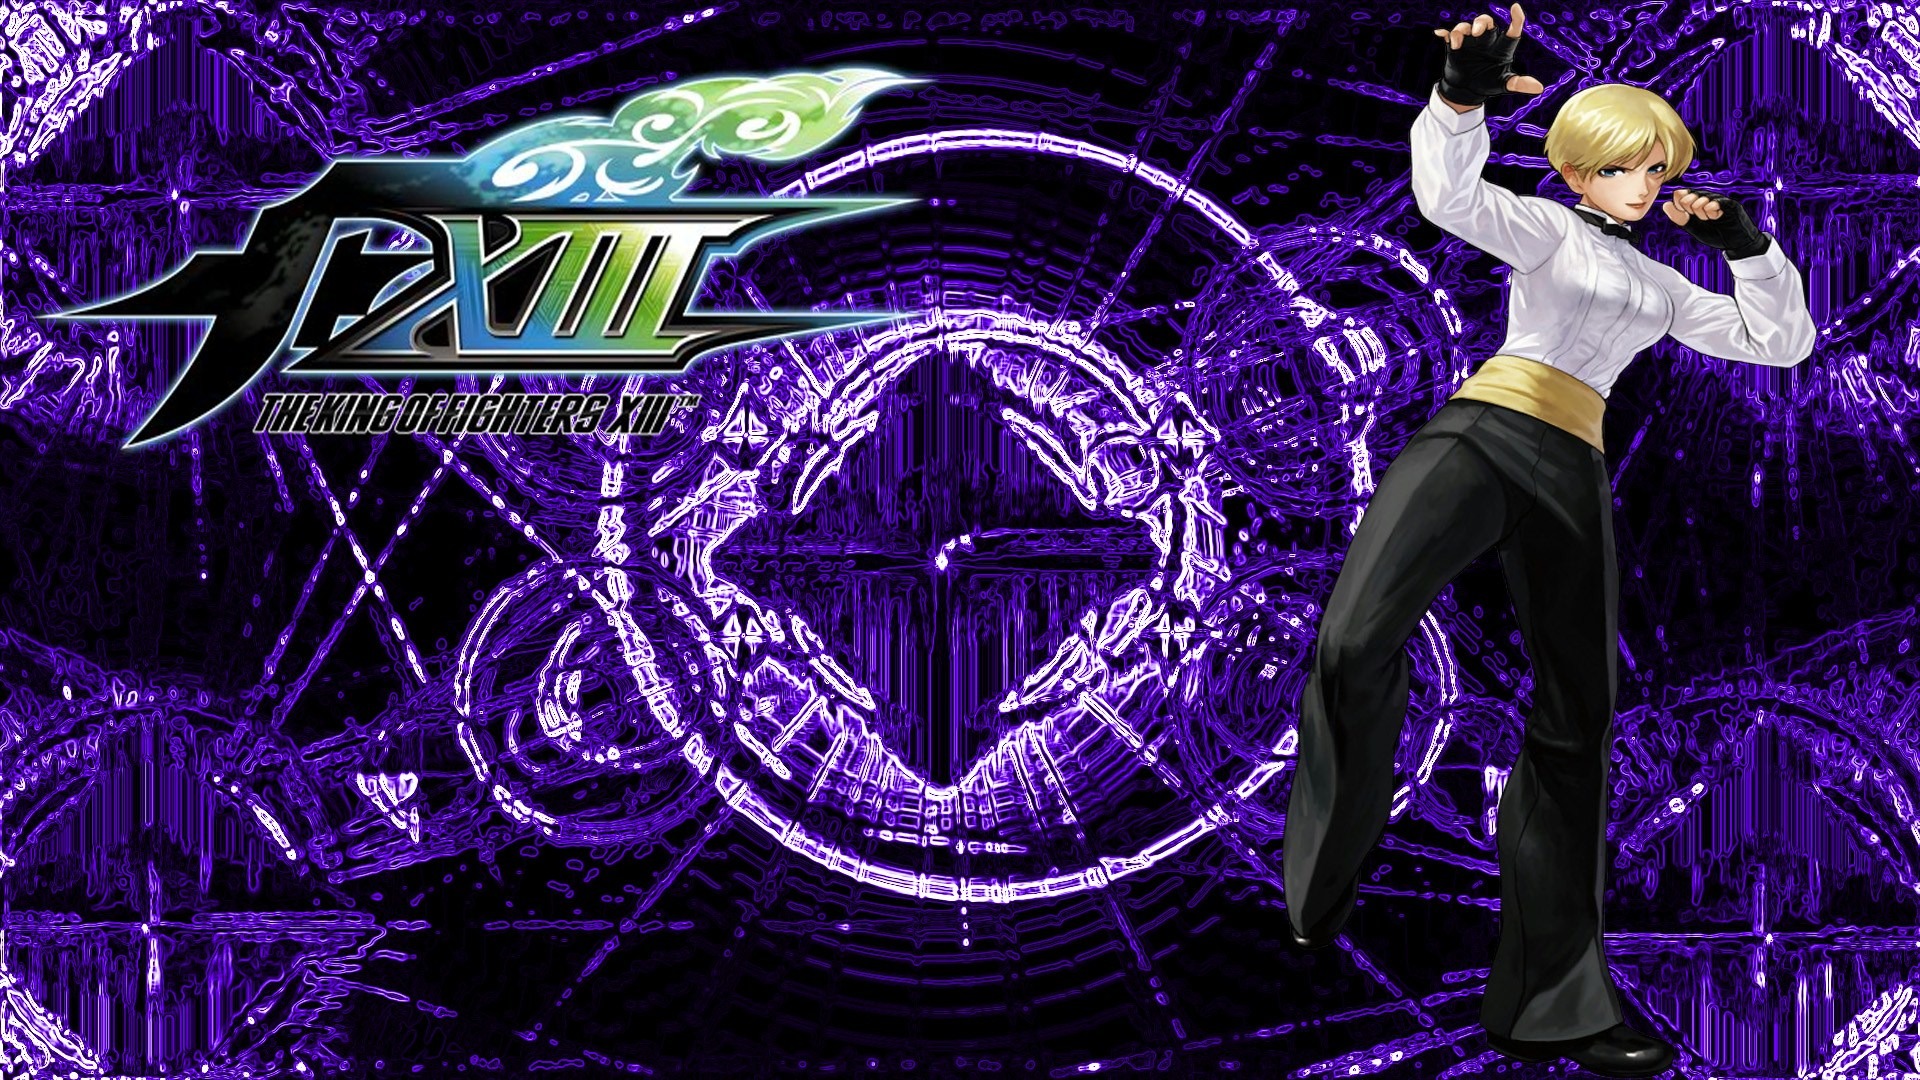 Le roi de wallpapers Fighters XIII #9 - 1920x1080